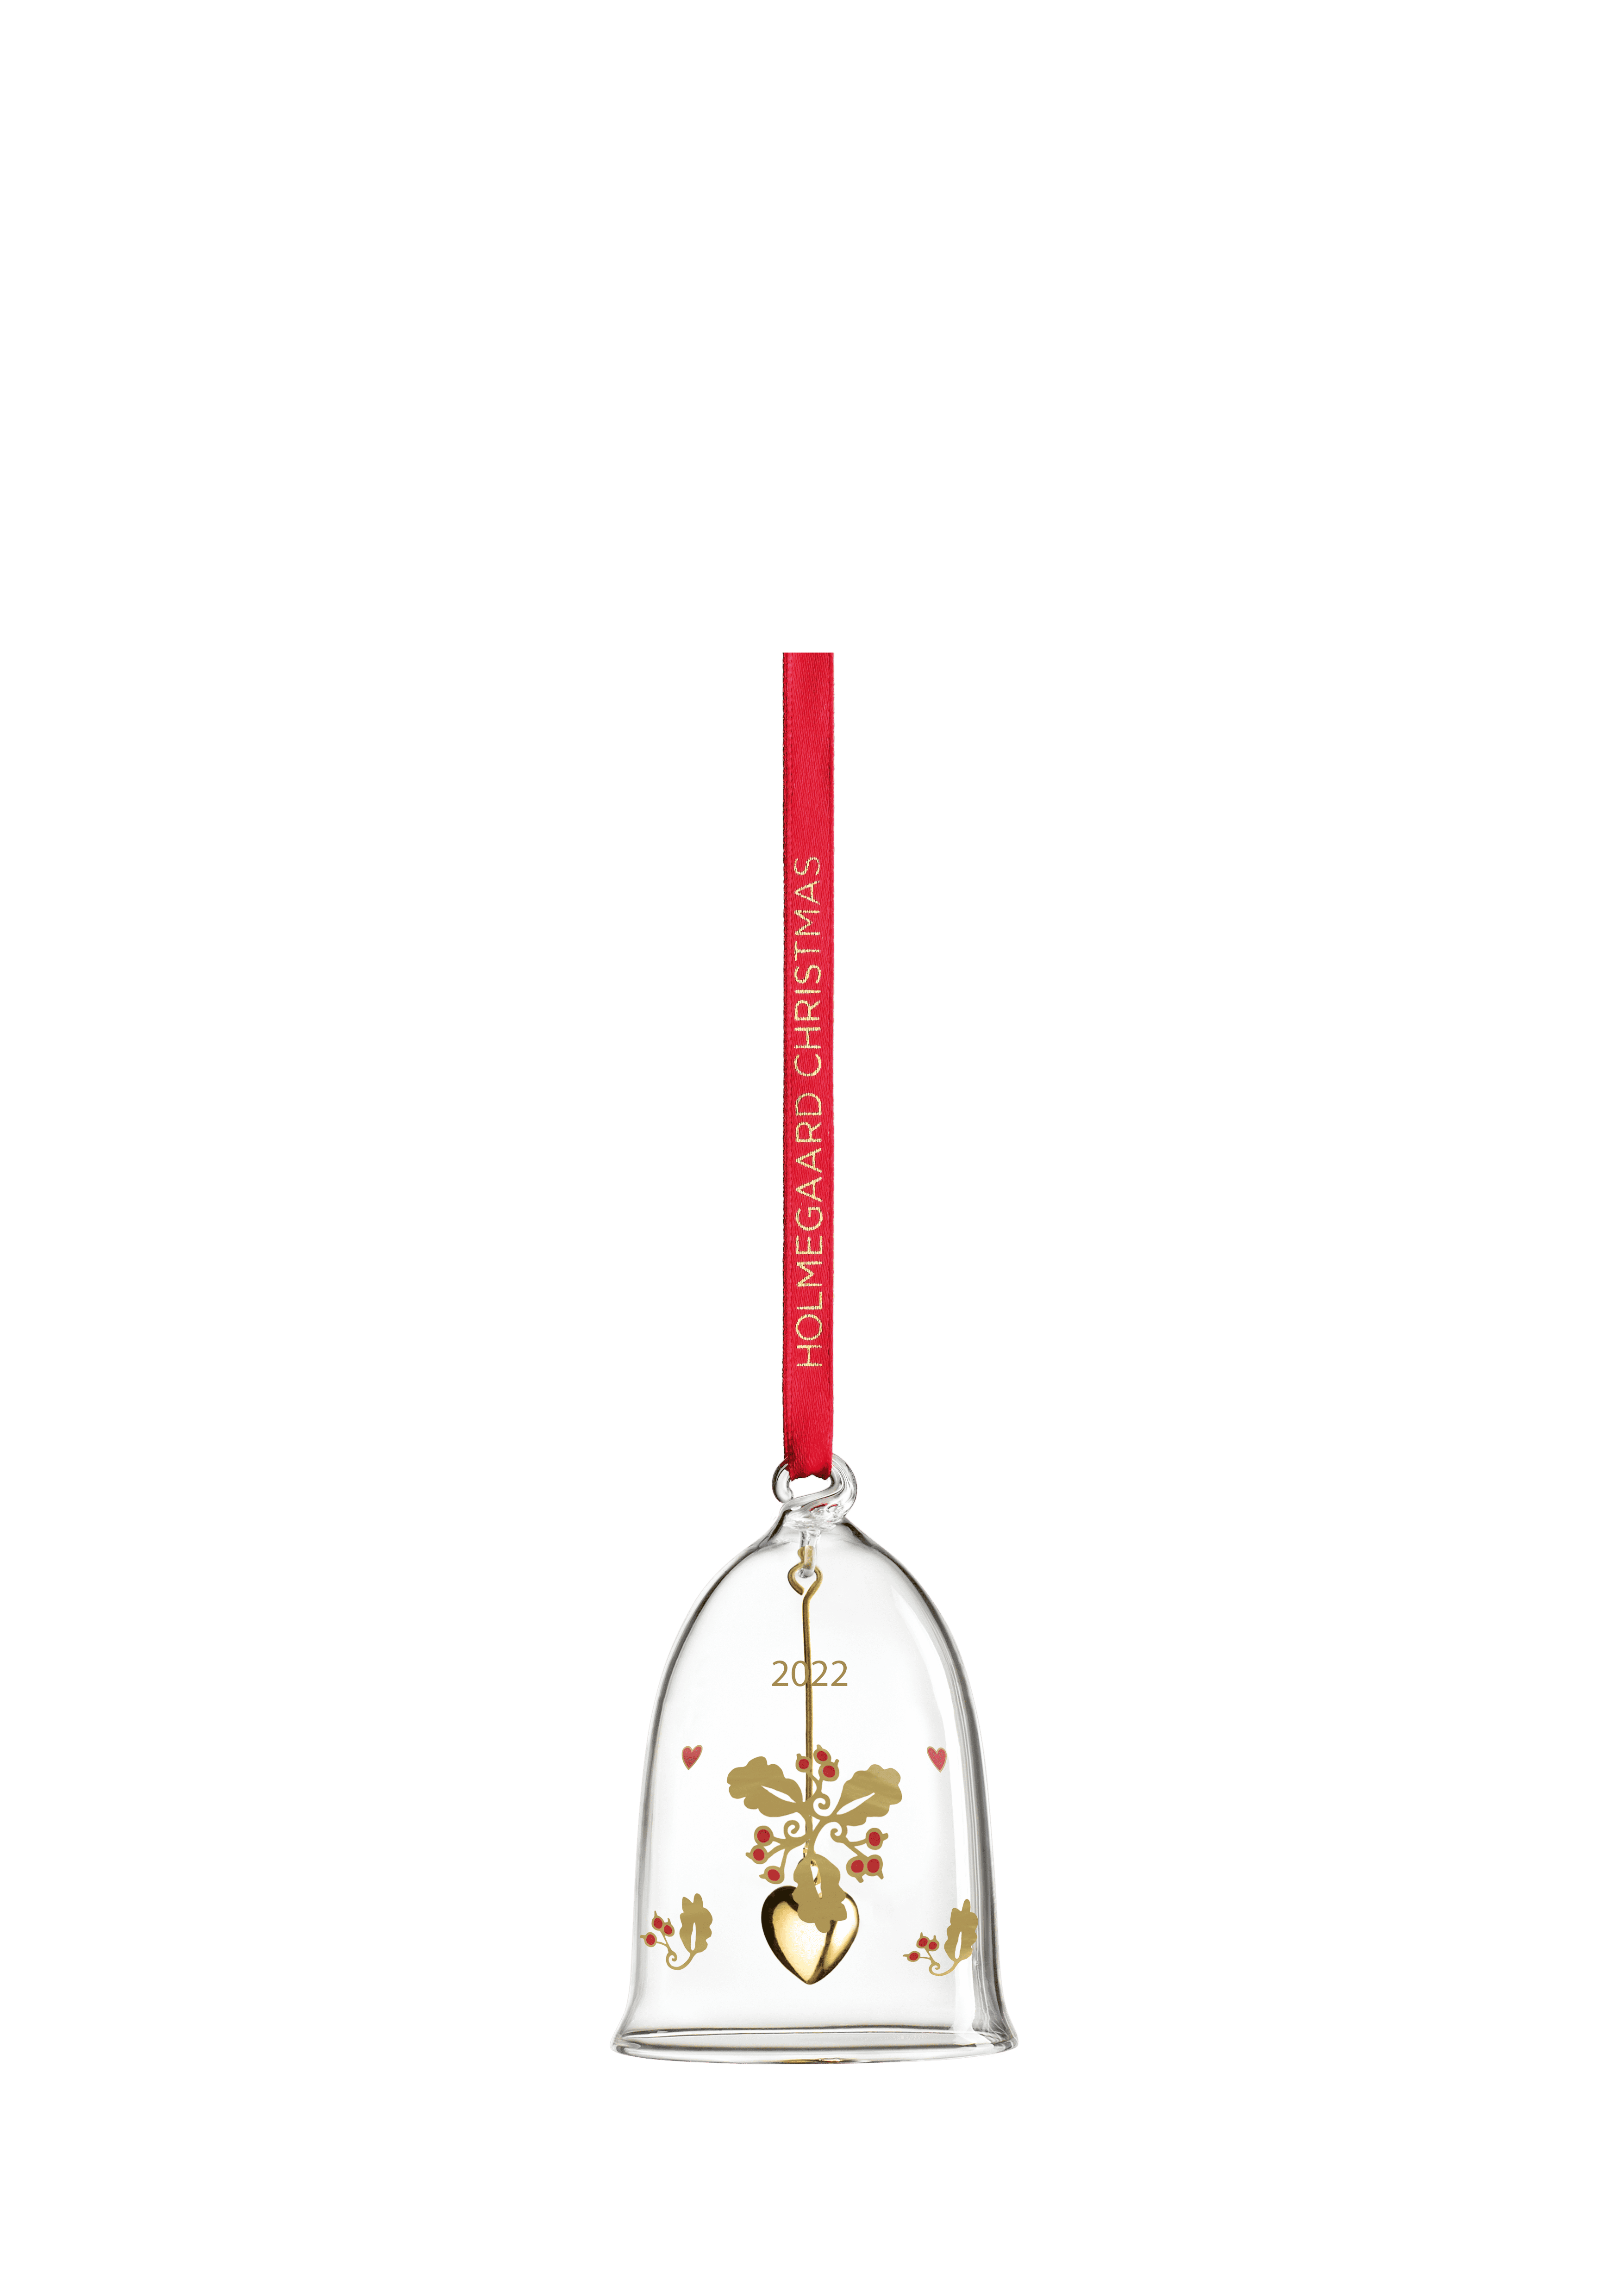 Annual Christmas Bell 2022 small